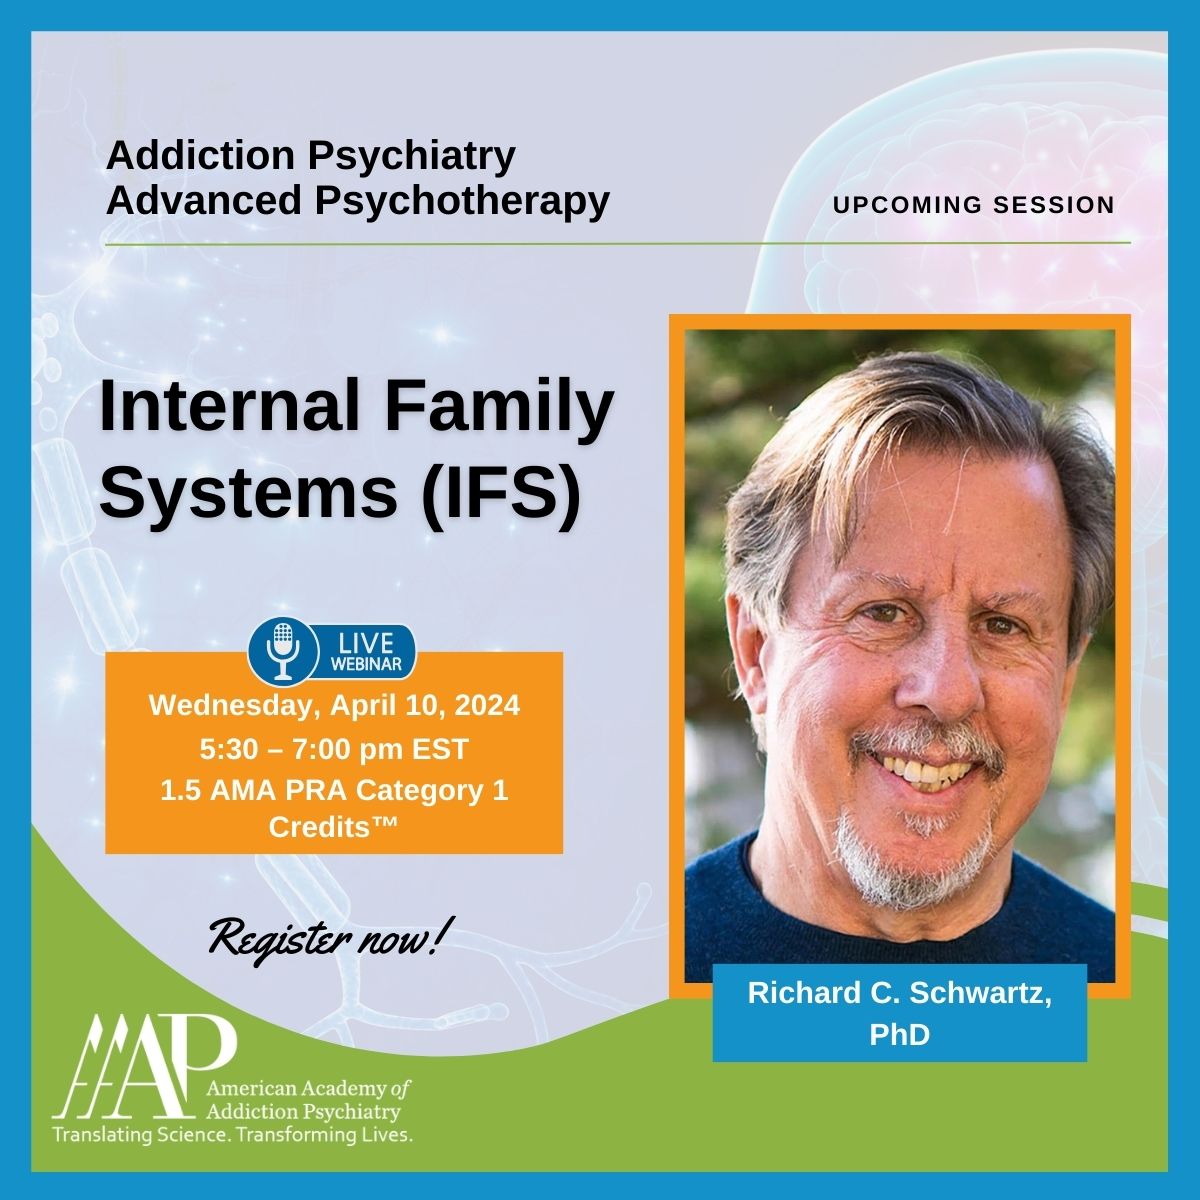 Join AAAP and presenter Richard C. Schwartz, PhD (@ifs_model) for this month’s Advanced Psychotherapy session, “Internal Family Systems (IFS),” on Wednesday, April 10, from 5:30-7:00 pm EST. Register: bit.ly/3POSEPD